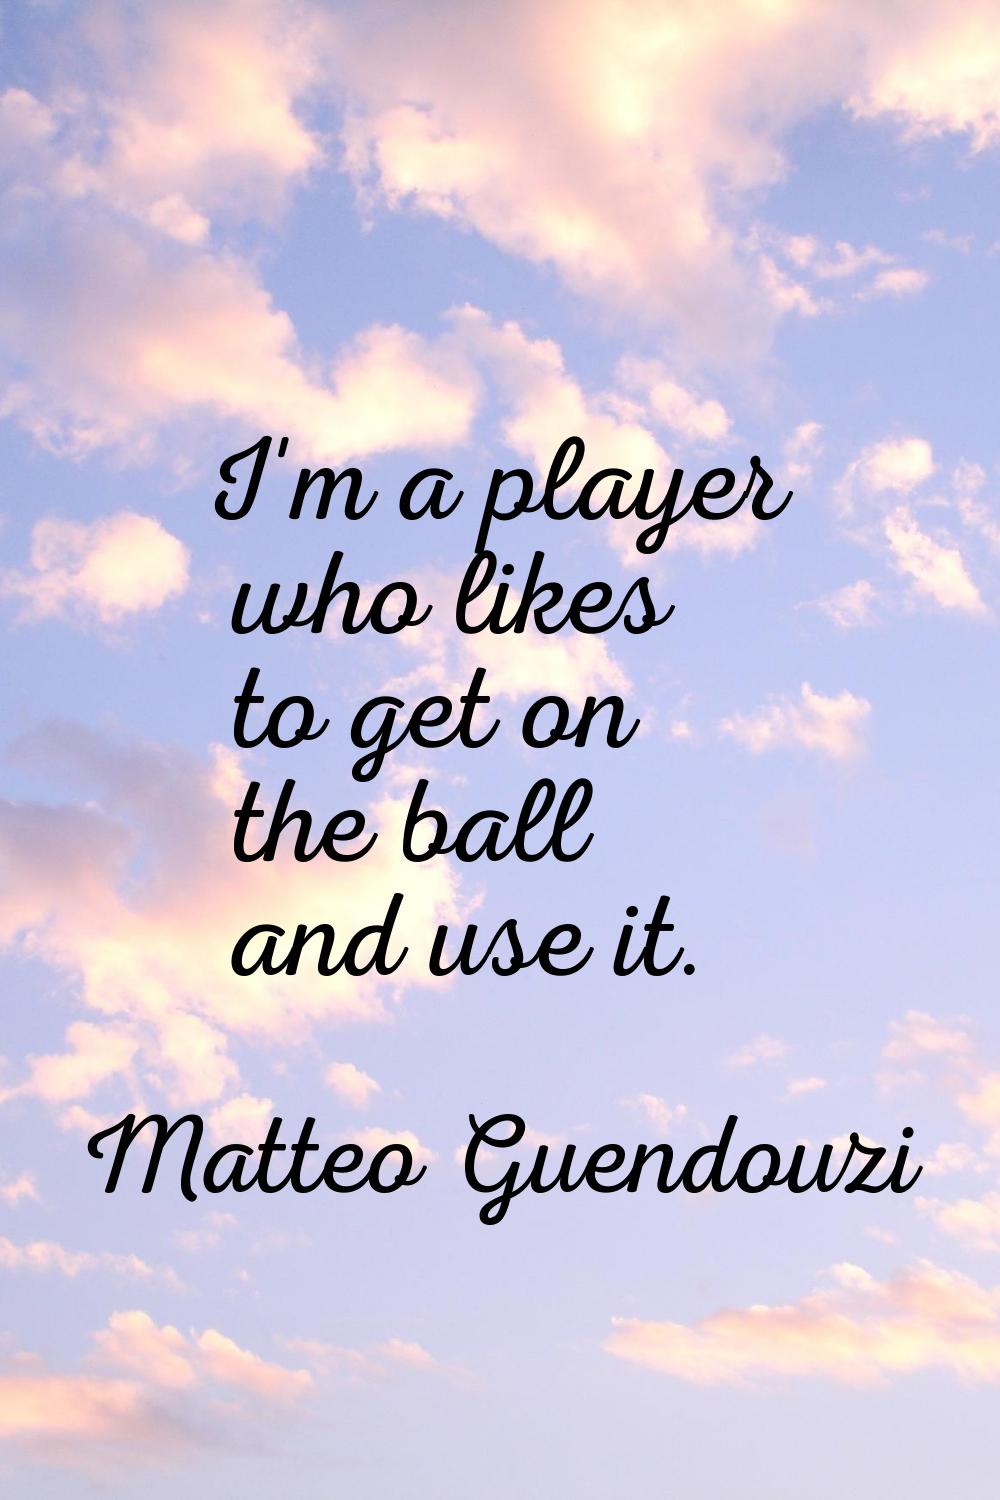 I'm a player who likes to get on the ball and use it.